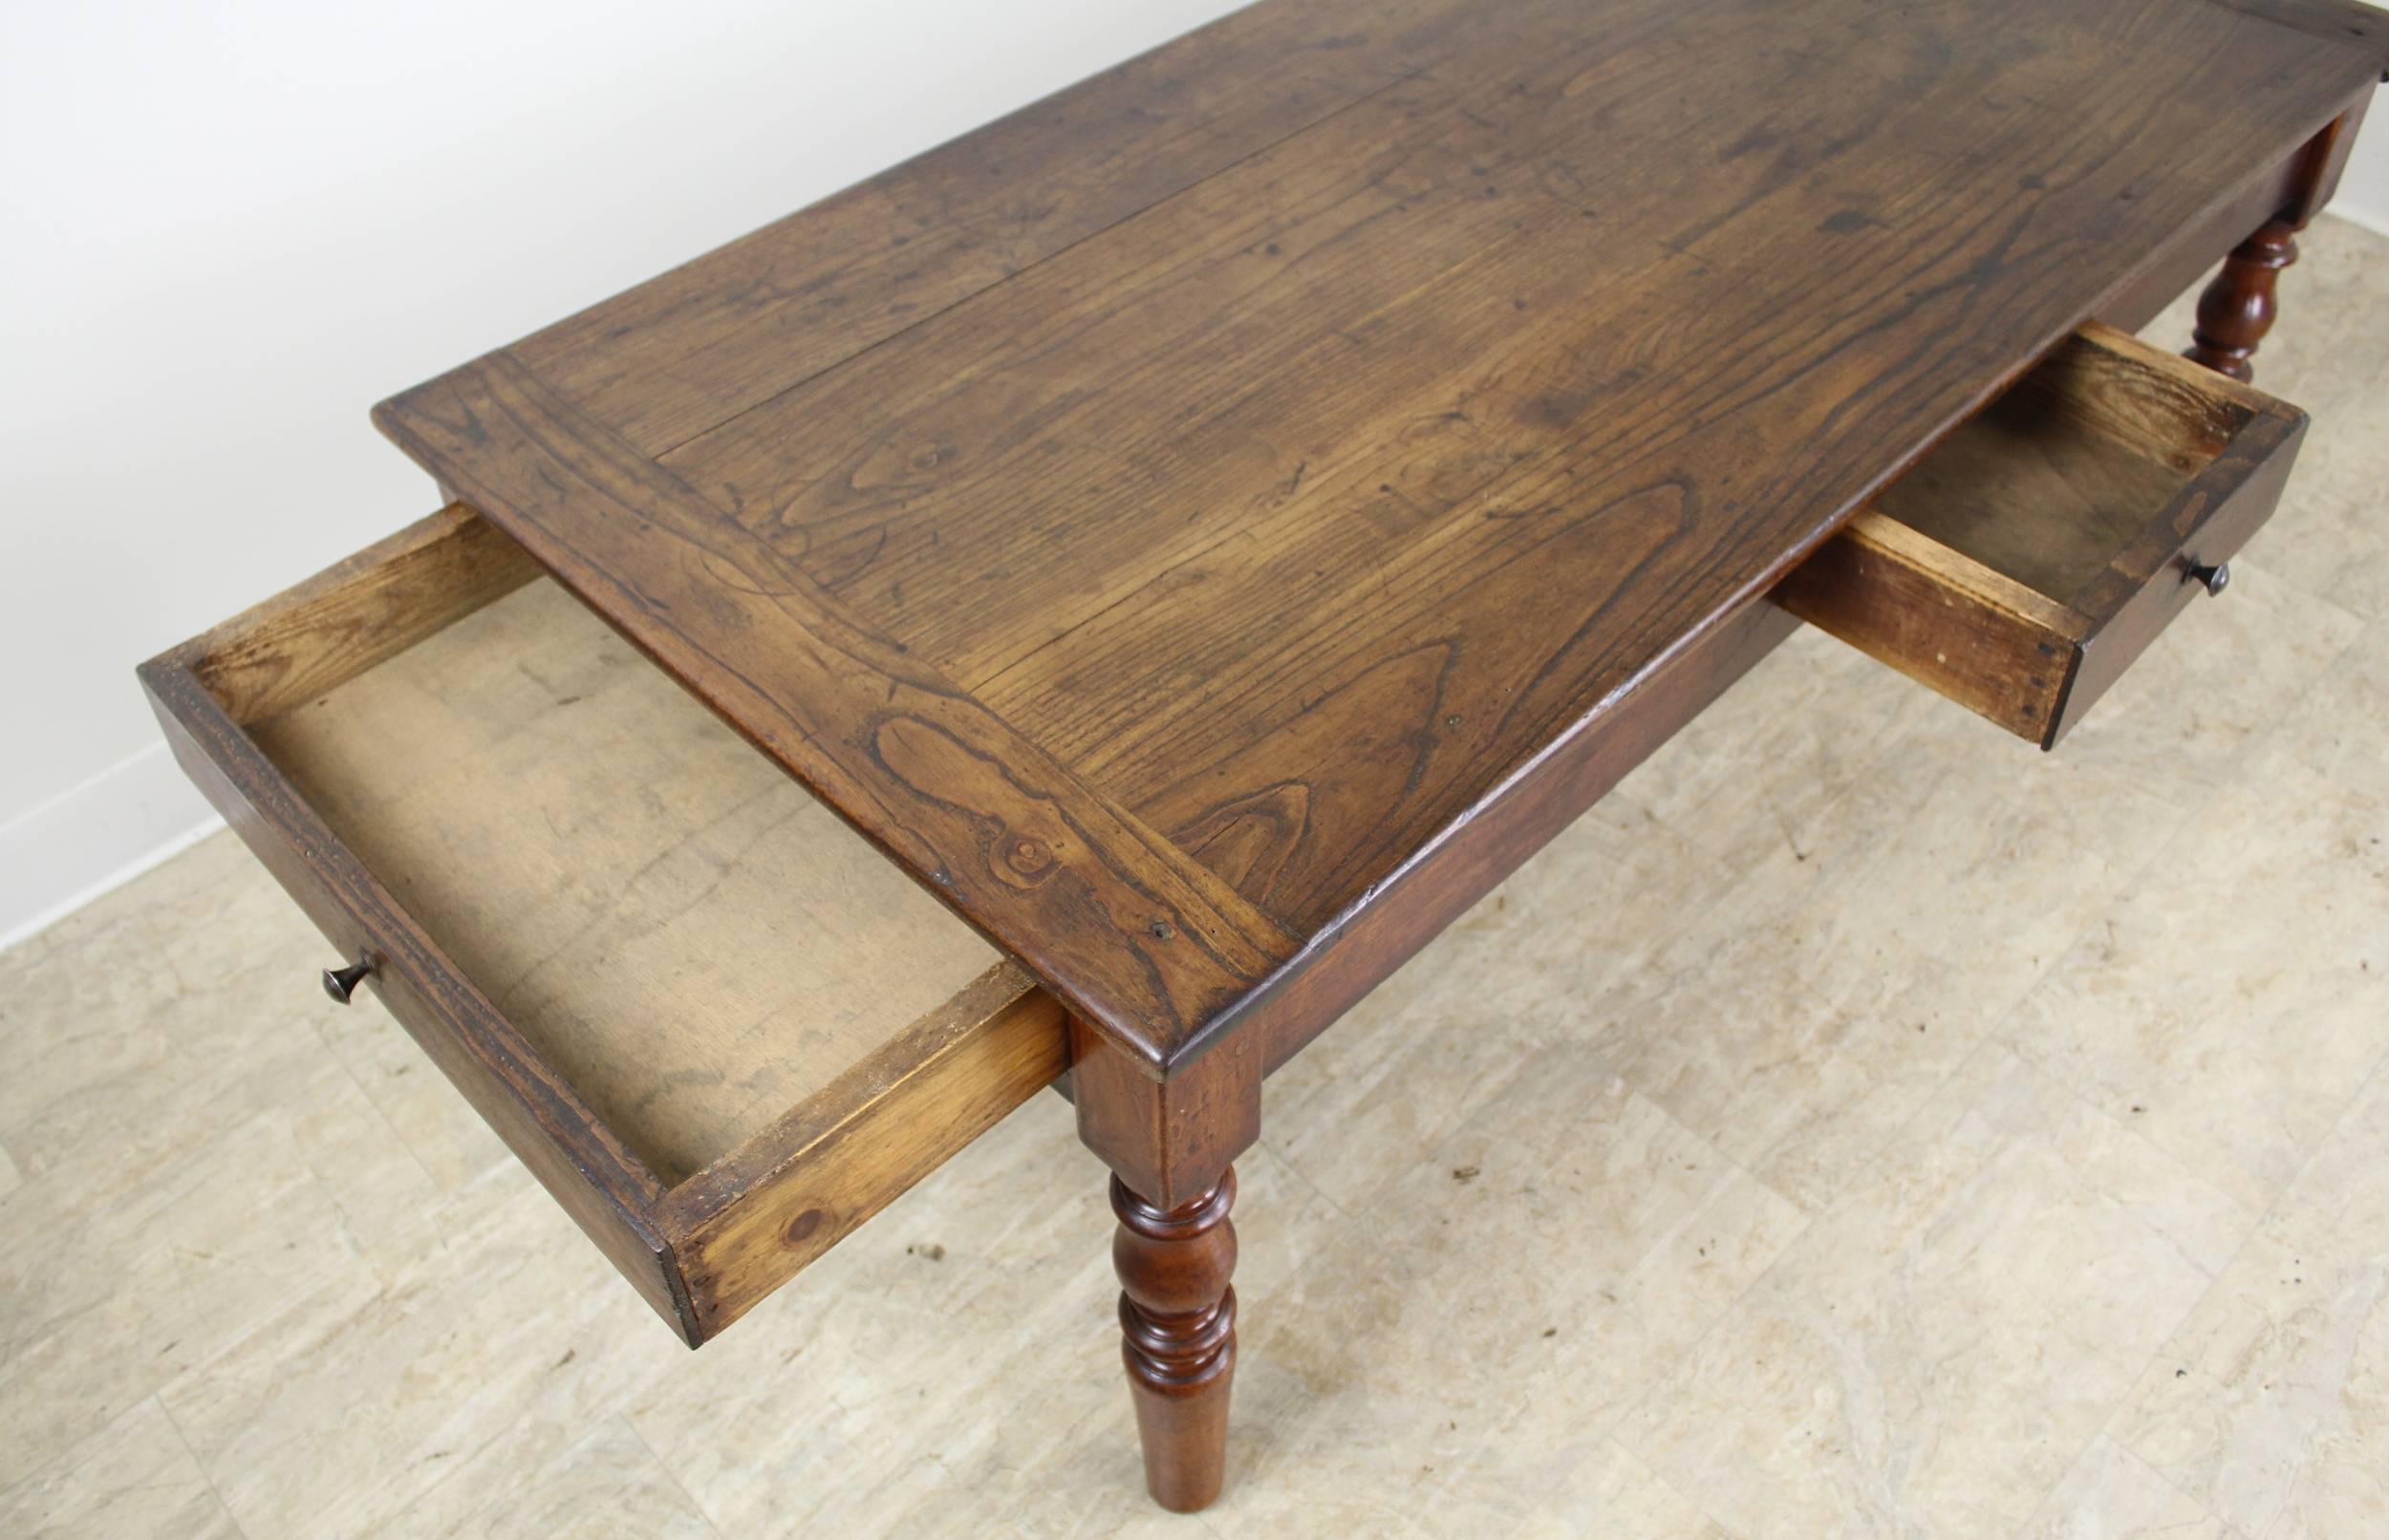 19th Century Antique Chestnut and Fruitwood Coffee Table with Three Drawers and Serving Shelf